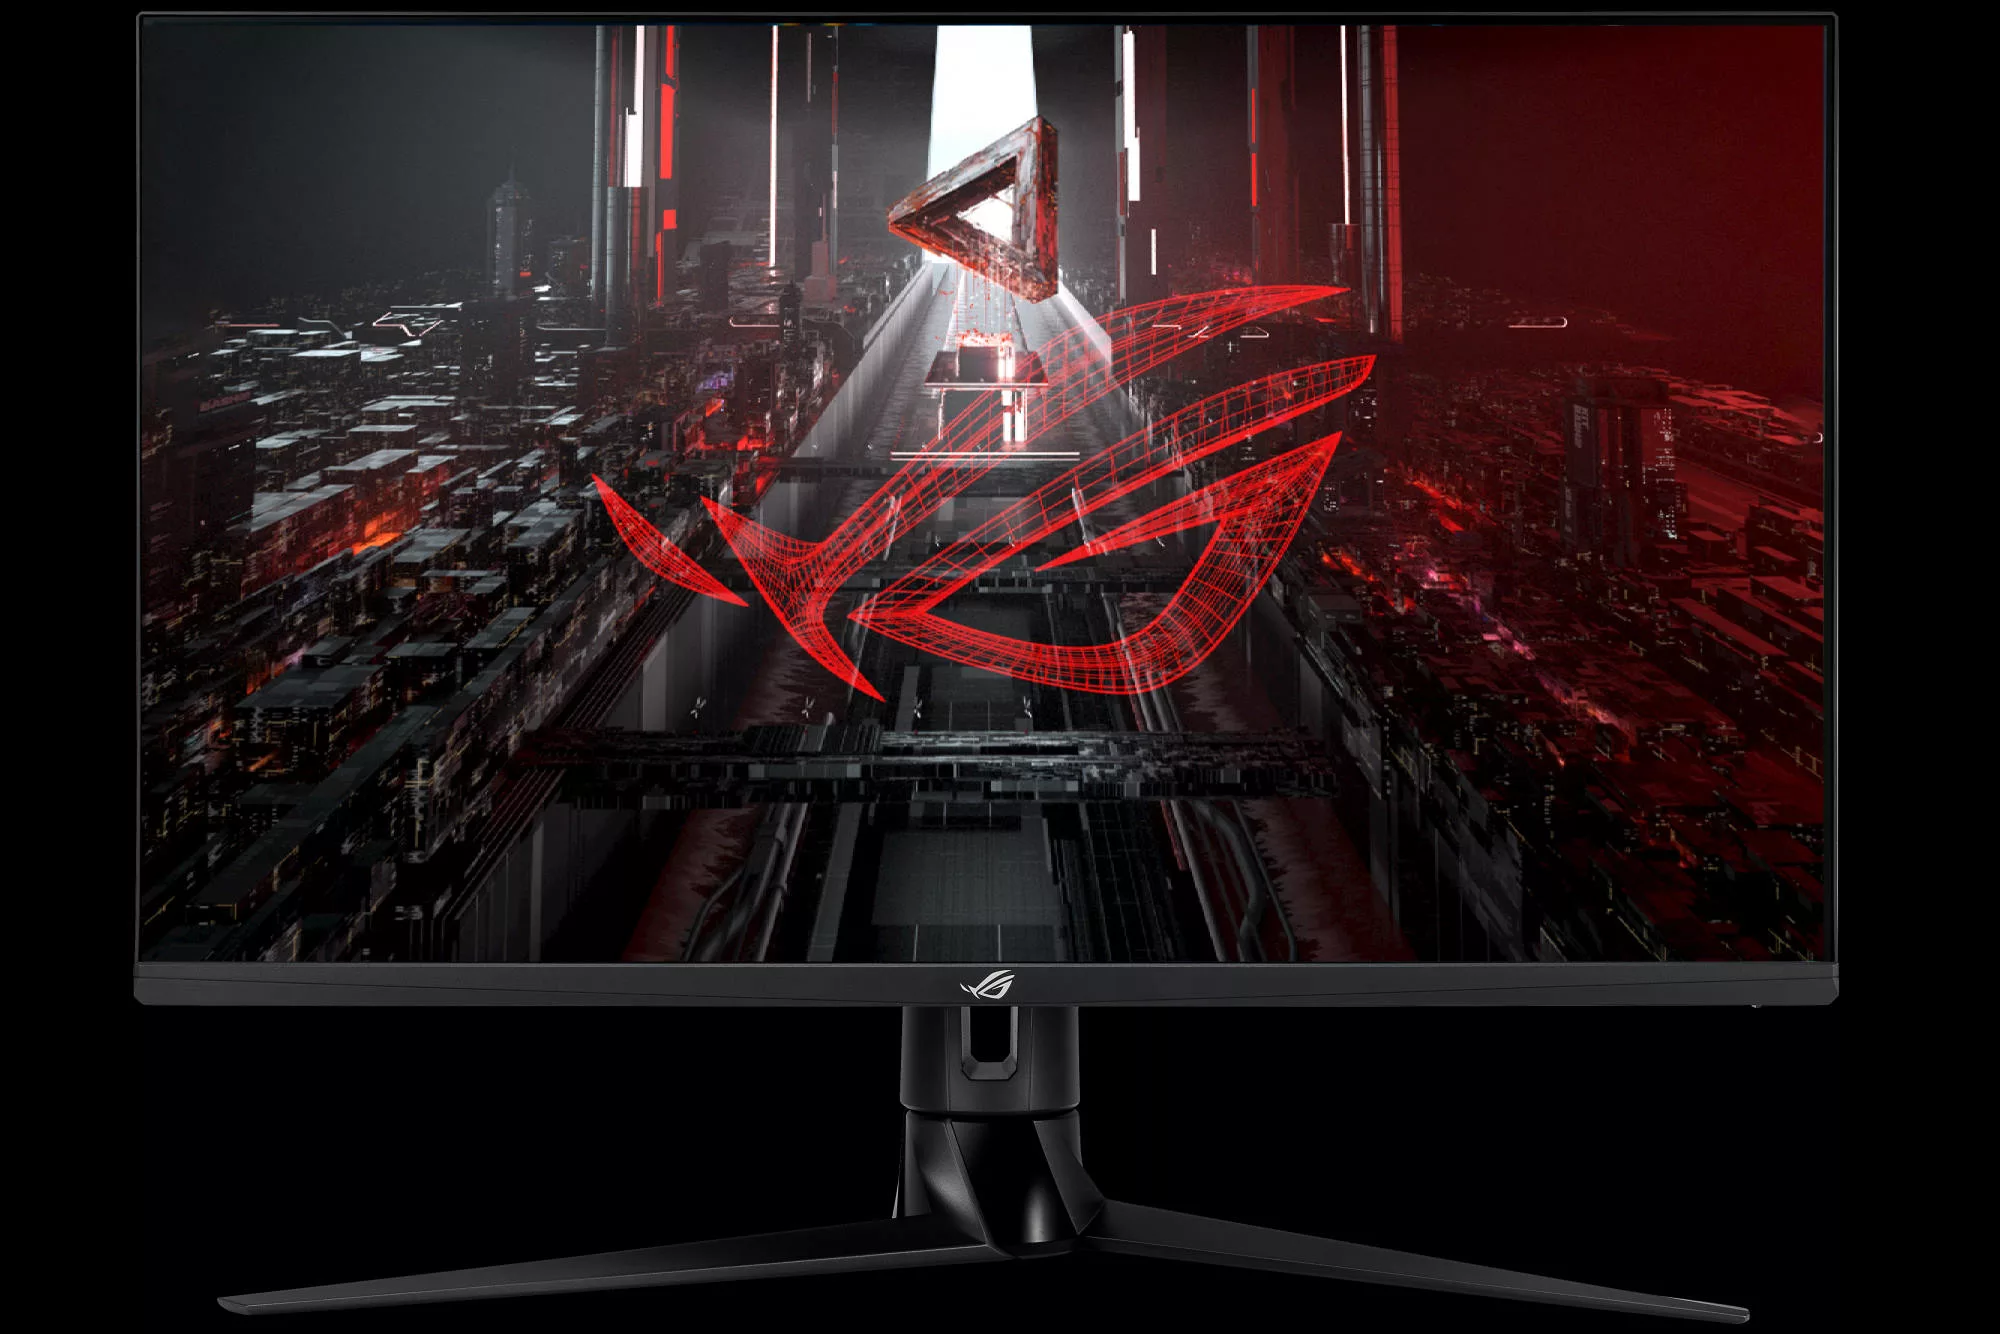 The ROG Swift PG32UQ display is ready to impress every gamer with 